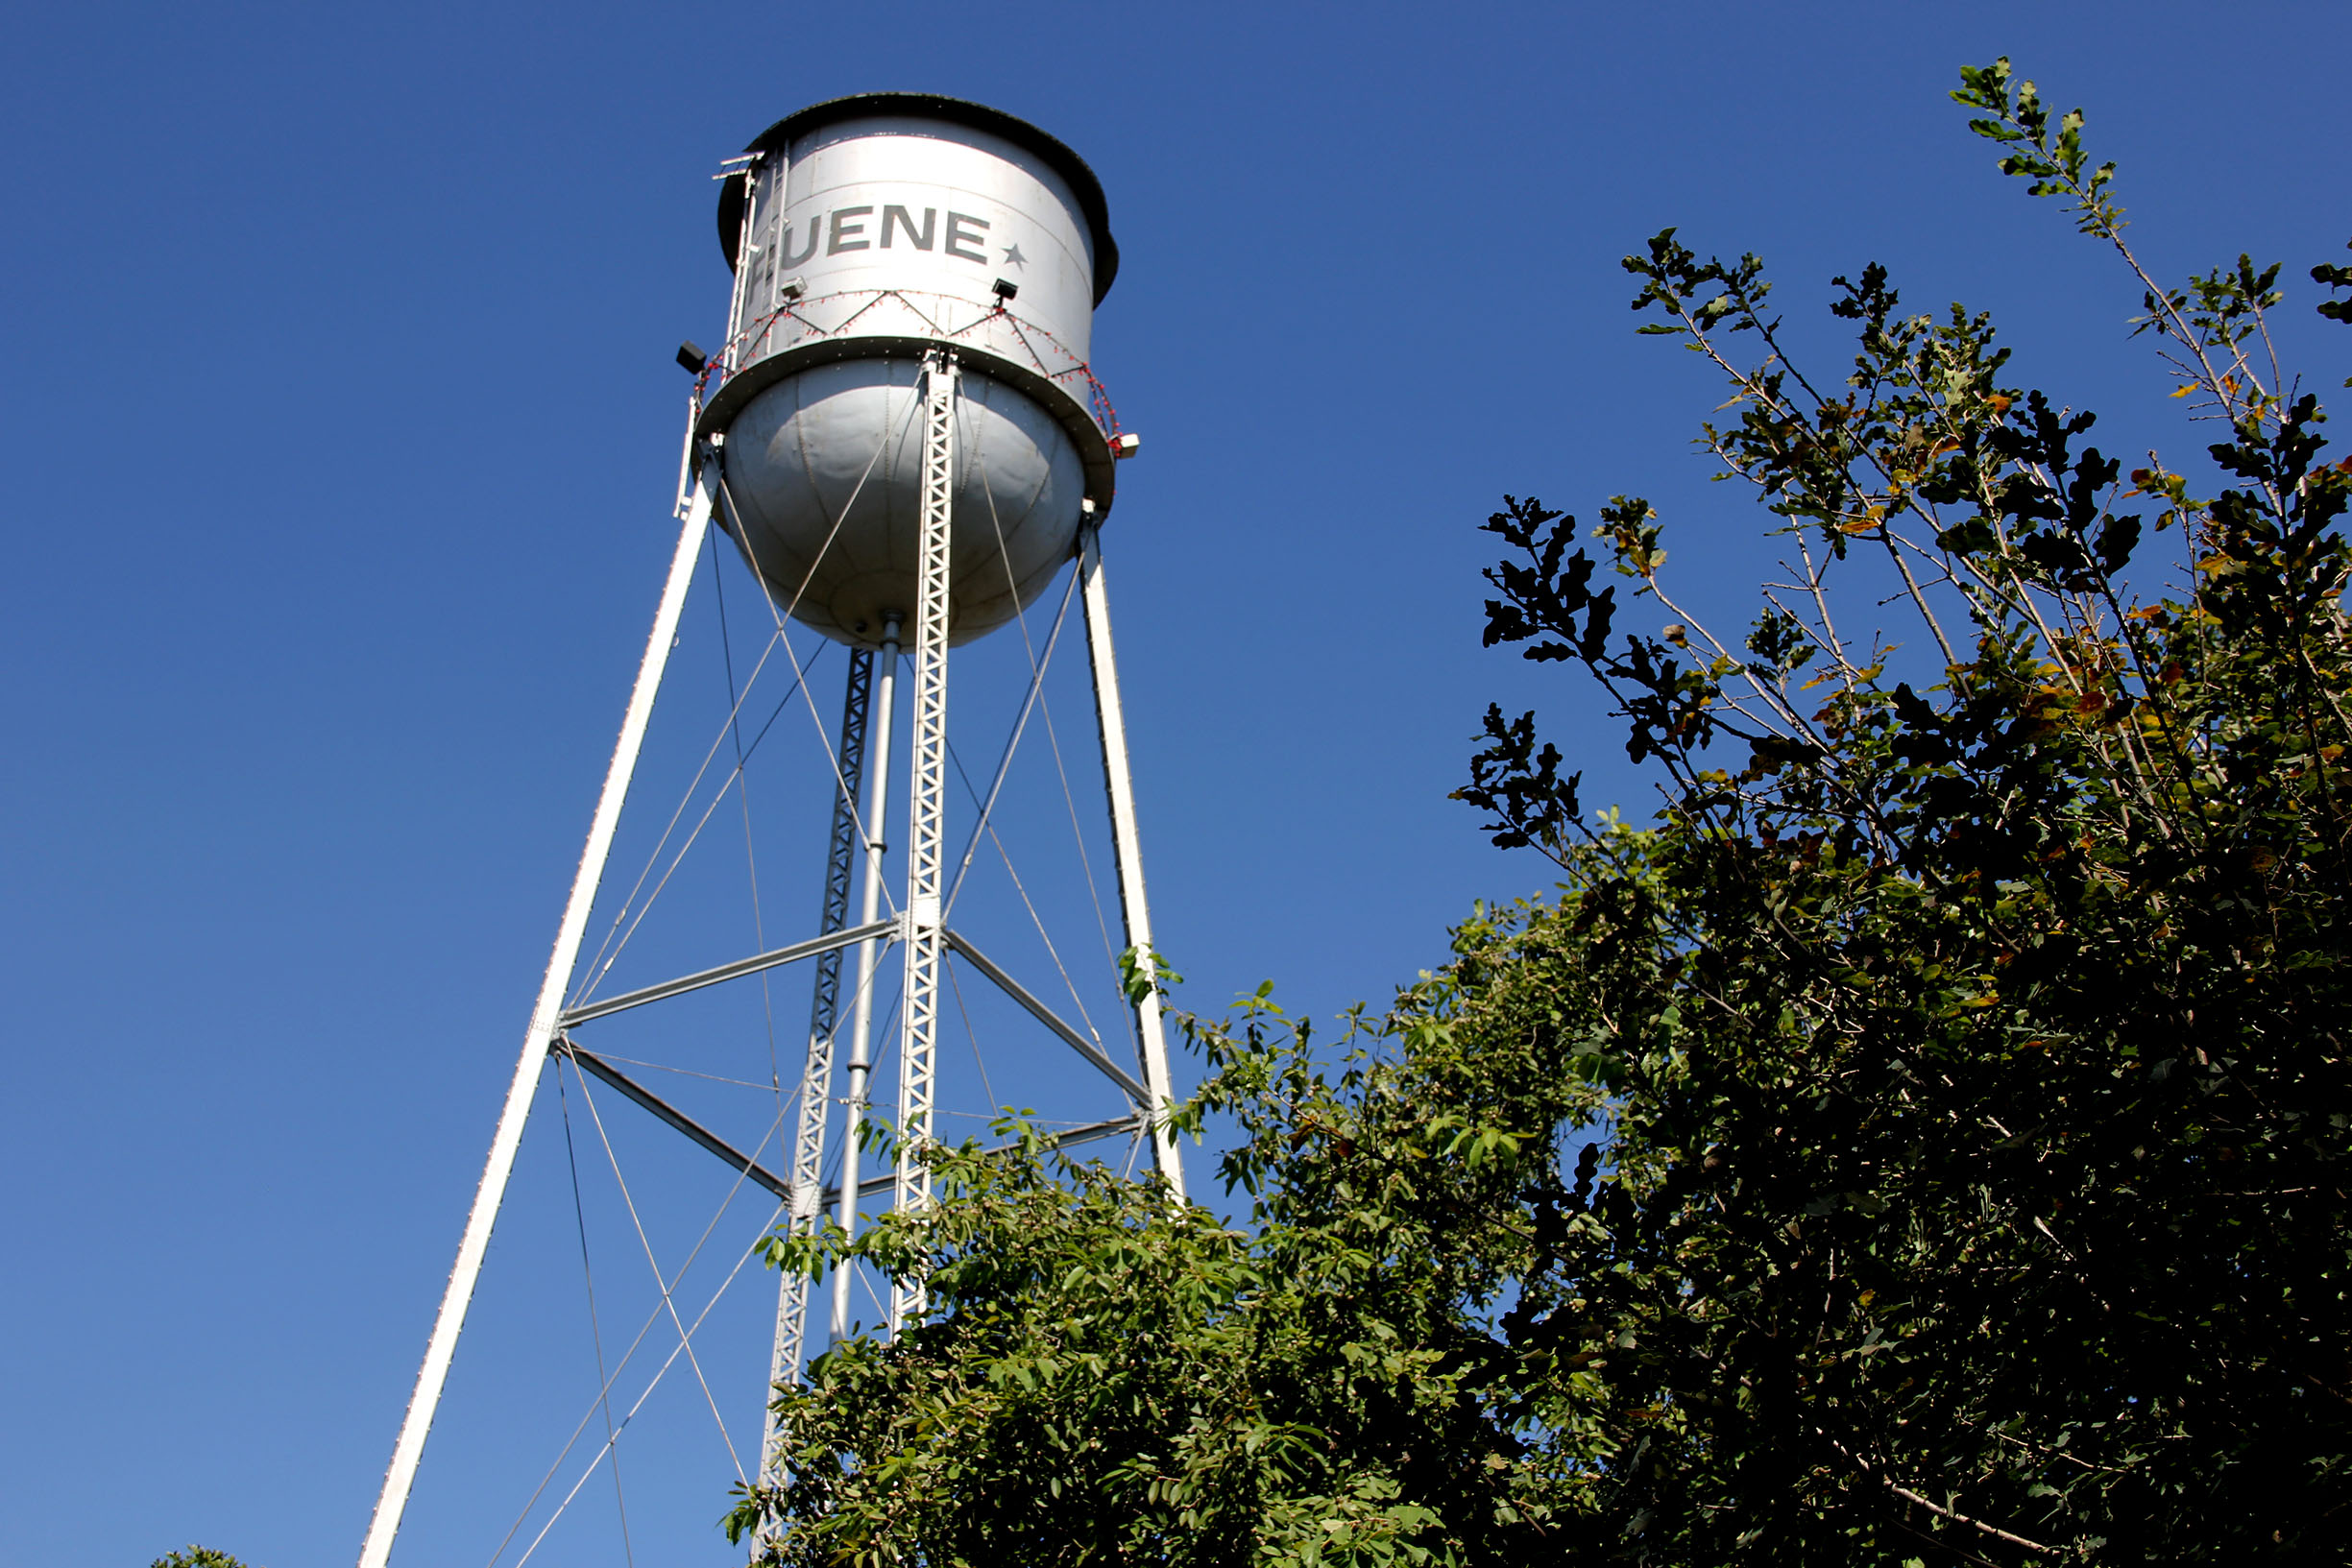 PHOTO: The historic Greune water tower is both an icon of the district and of the Texas Clay Festival. Nearly every year, the water tower is featured on the poster design. Photo by The Signal Online Editor Alyssa Shotwell.